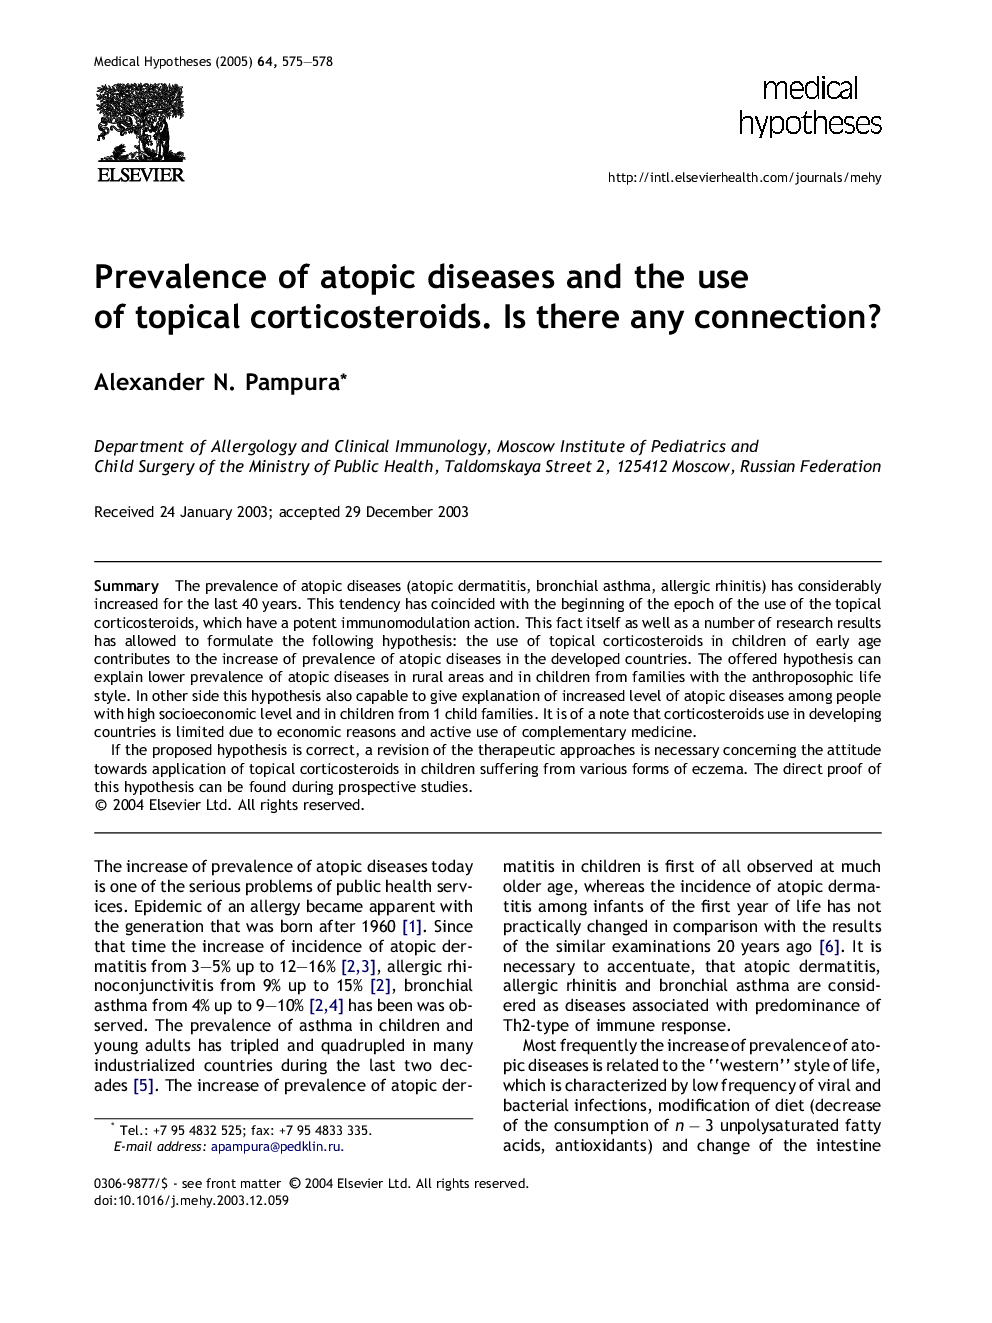 Prevalence of atopic diseases and the use of topical corticosteroids. Is there any connection?